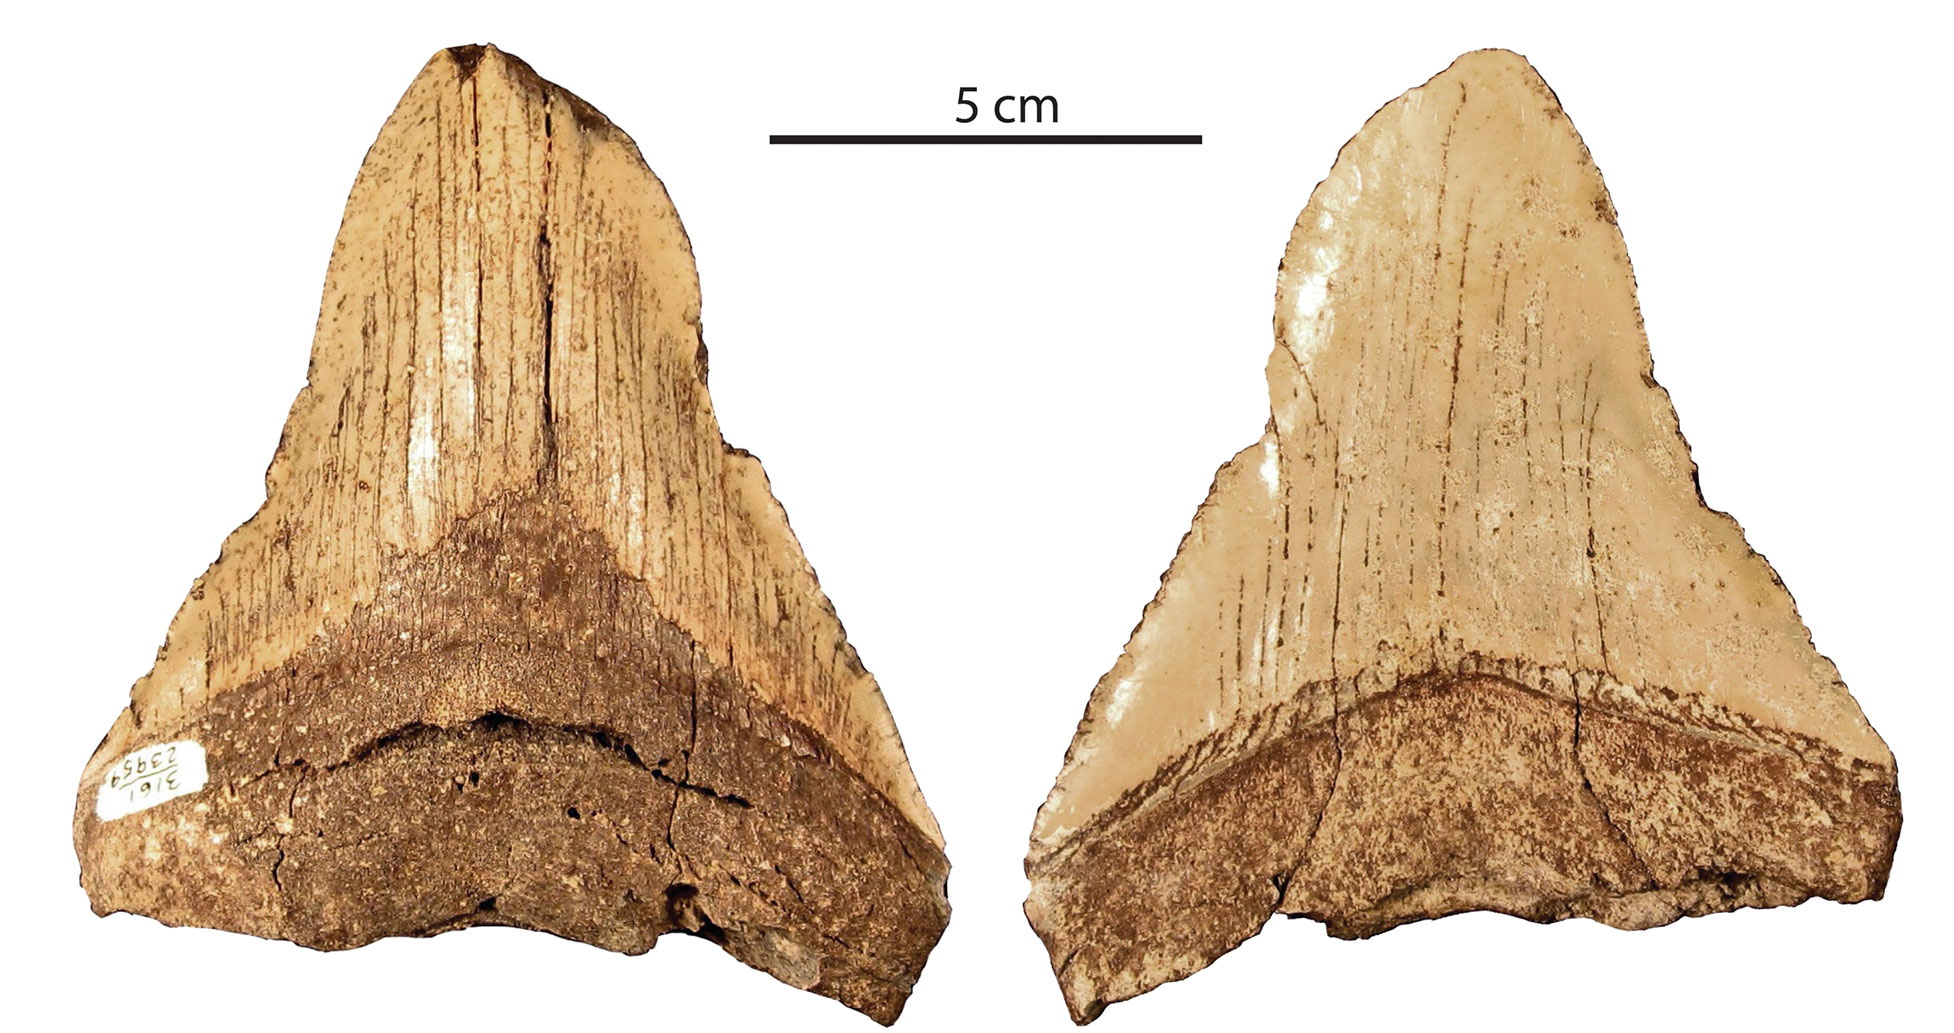 Photographs showing both sides of a megalodon tooth from the Pliocene of San Diego County, California. The tooth is tan in color and roughly triangular in shape. It is missing part of the tip and also a portion of the roots.